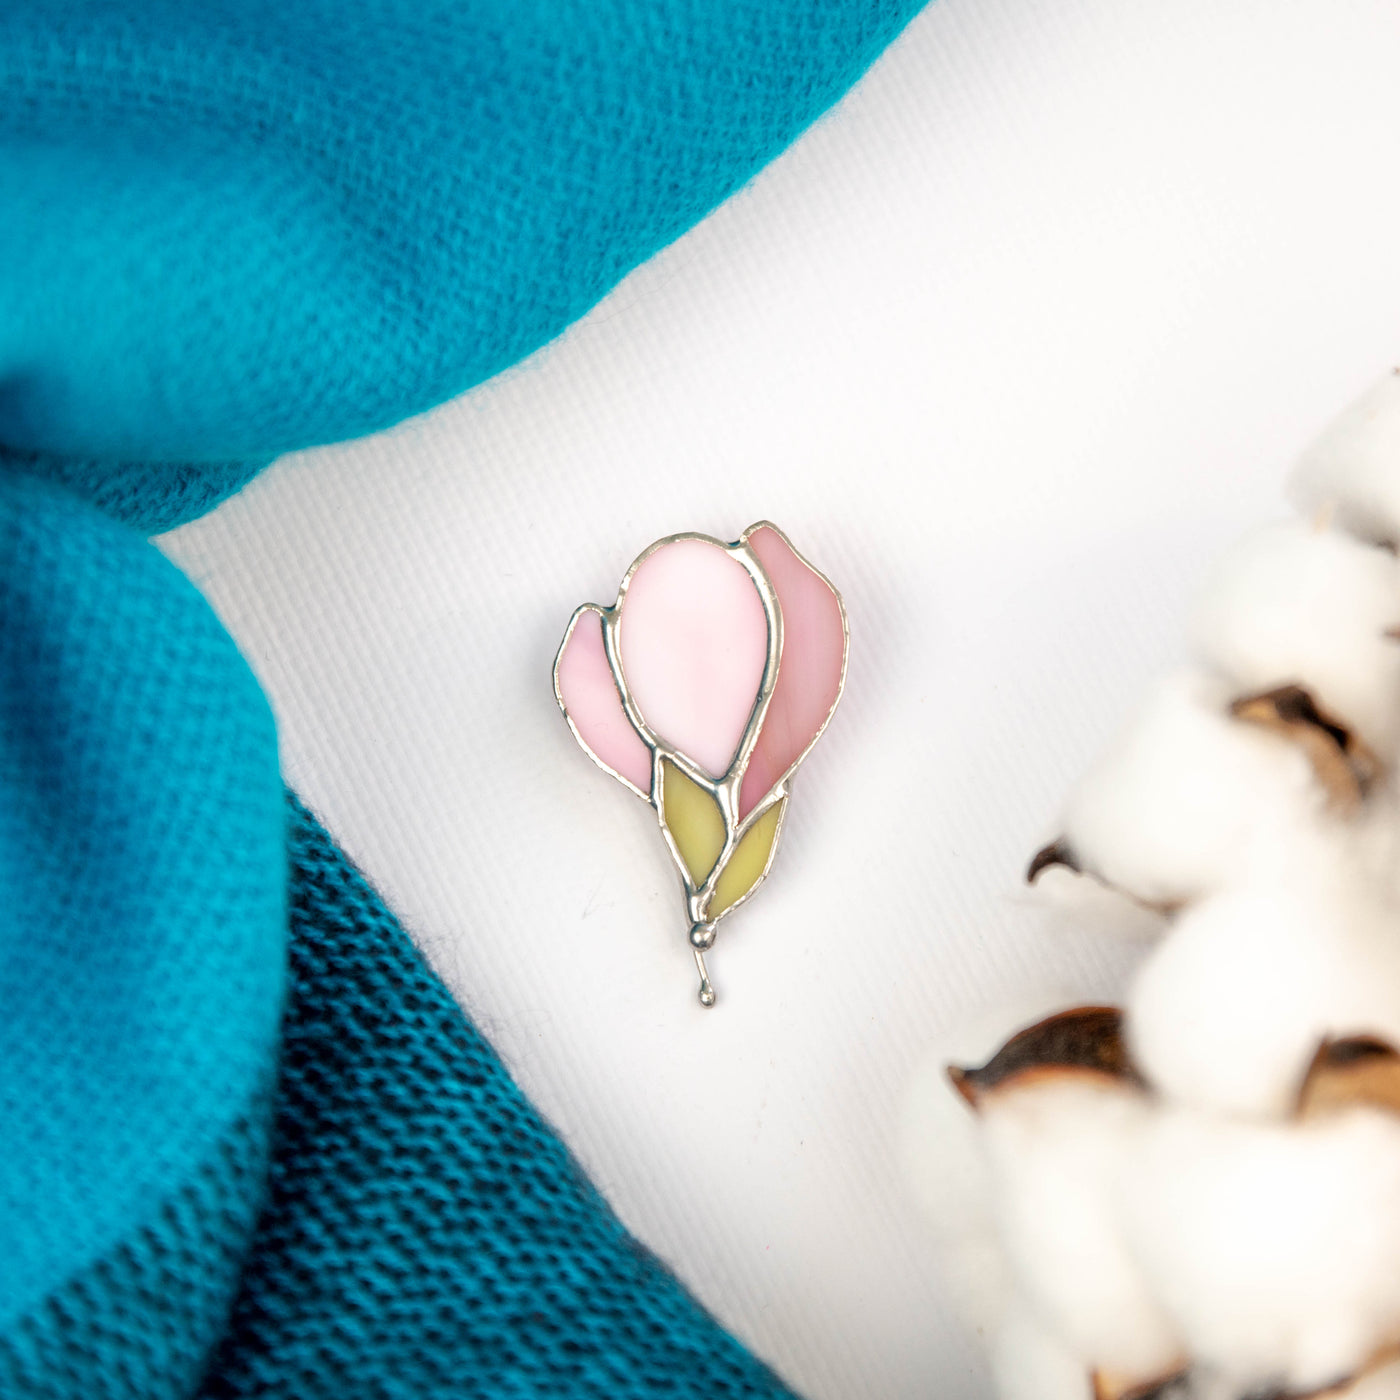 Stained glass magnolia flower brooch